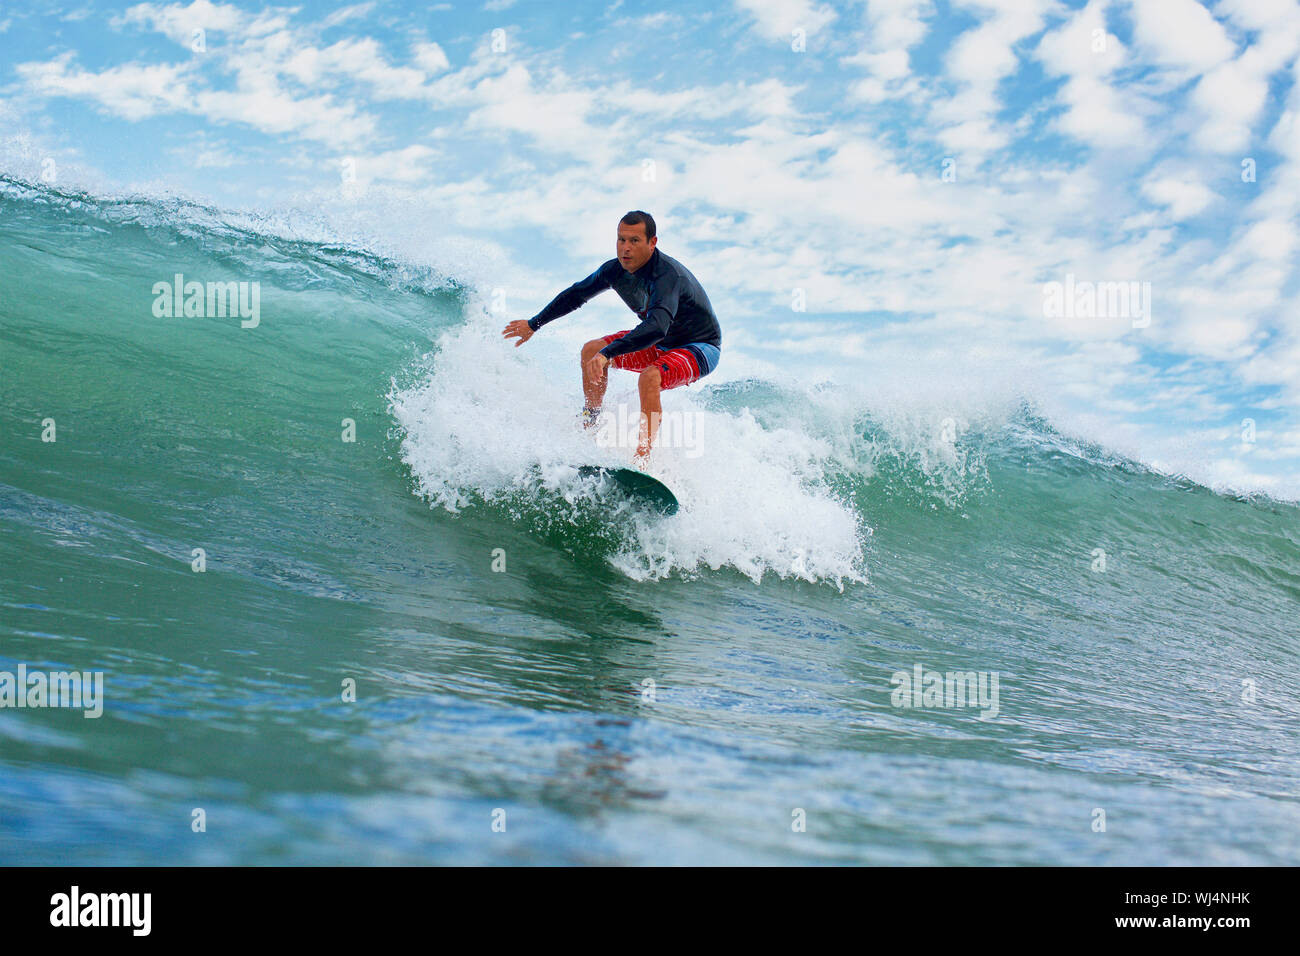 Male surfer riding ocean wave Stock Photo